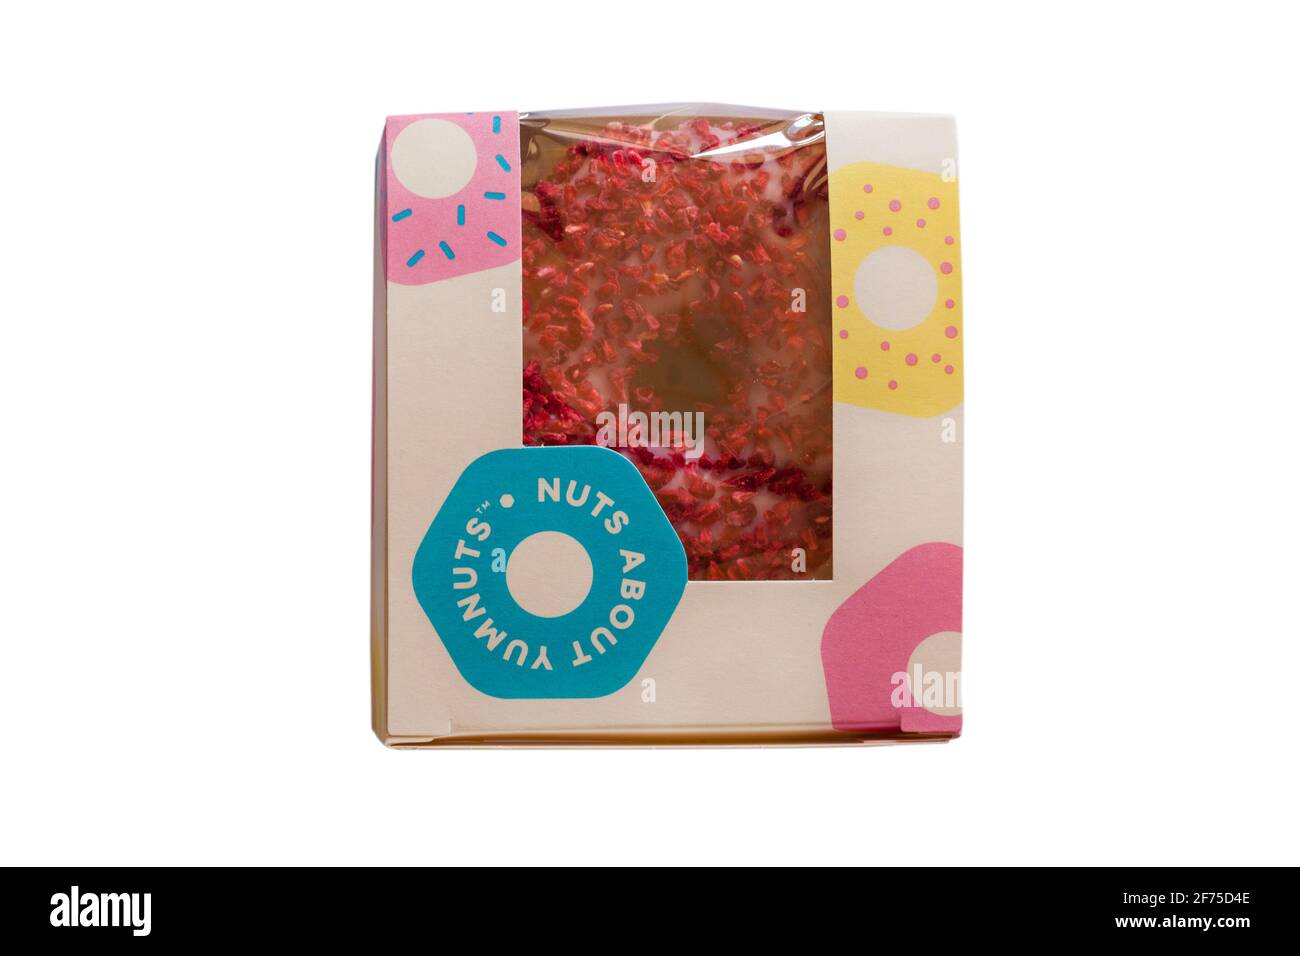 Raspberry Royale Yumnut, cross between a doughnut and a yum yum in box, from M&S in-store bakery Stock Photo